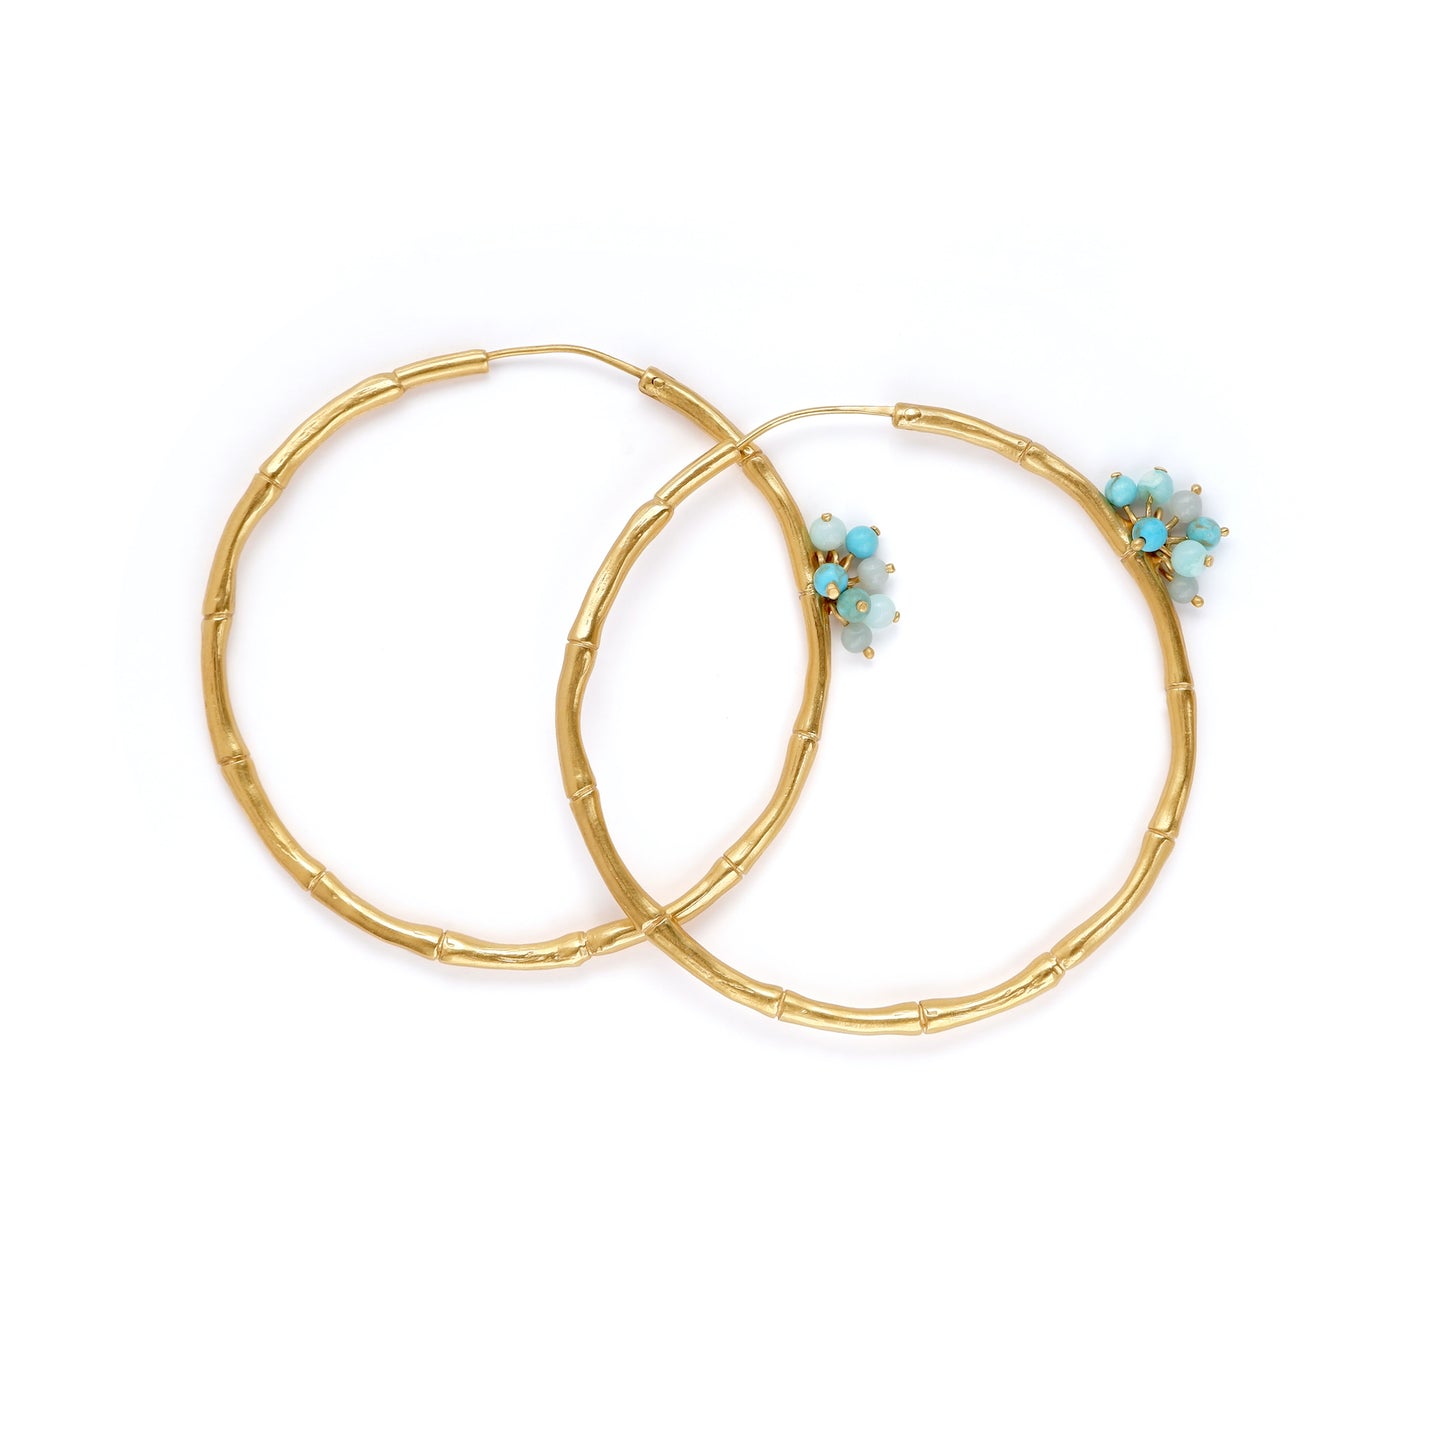 Gold Vermeil Bamboo Hoops large size, blue, turquoise gemstone Bauble beads